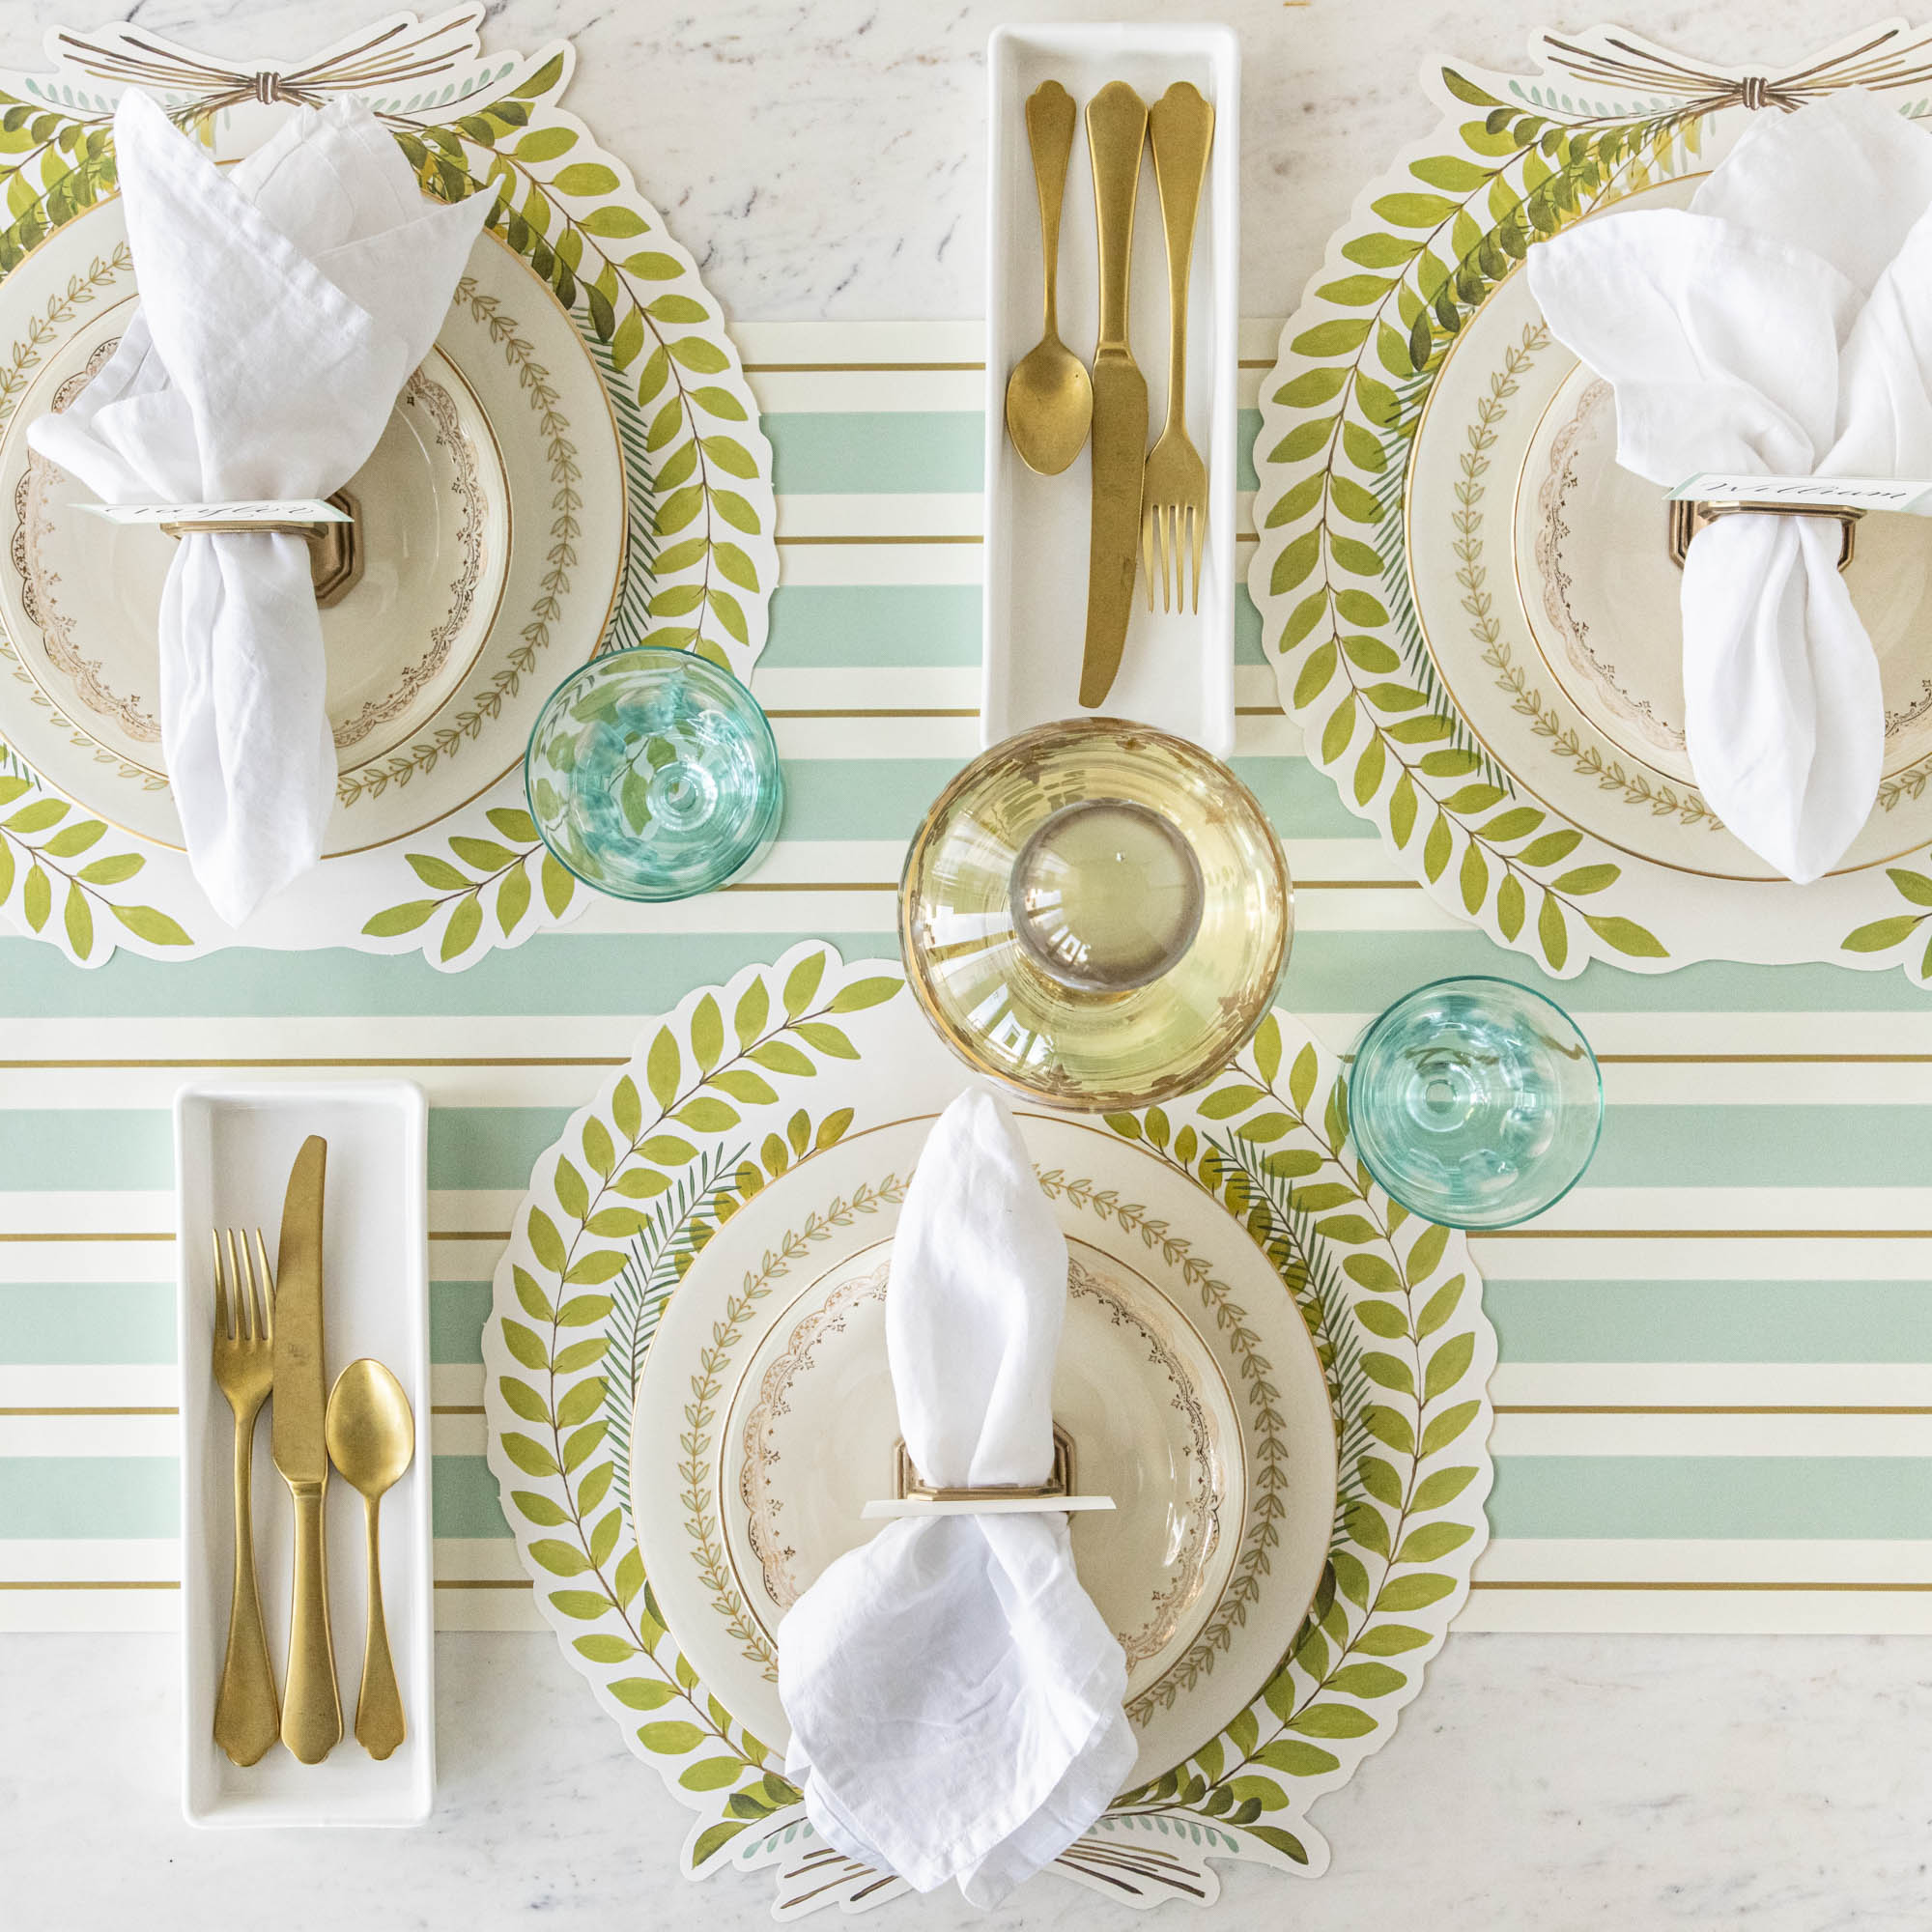 The Seafoam &amp; Gold Awning Stripe Runner under an elegant table setting, from above.